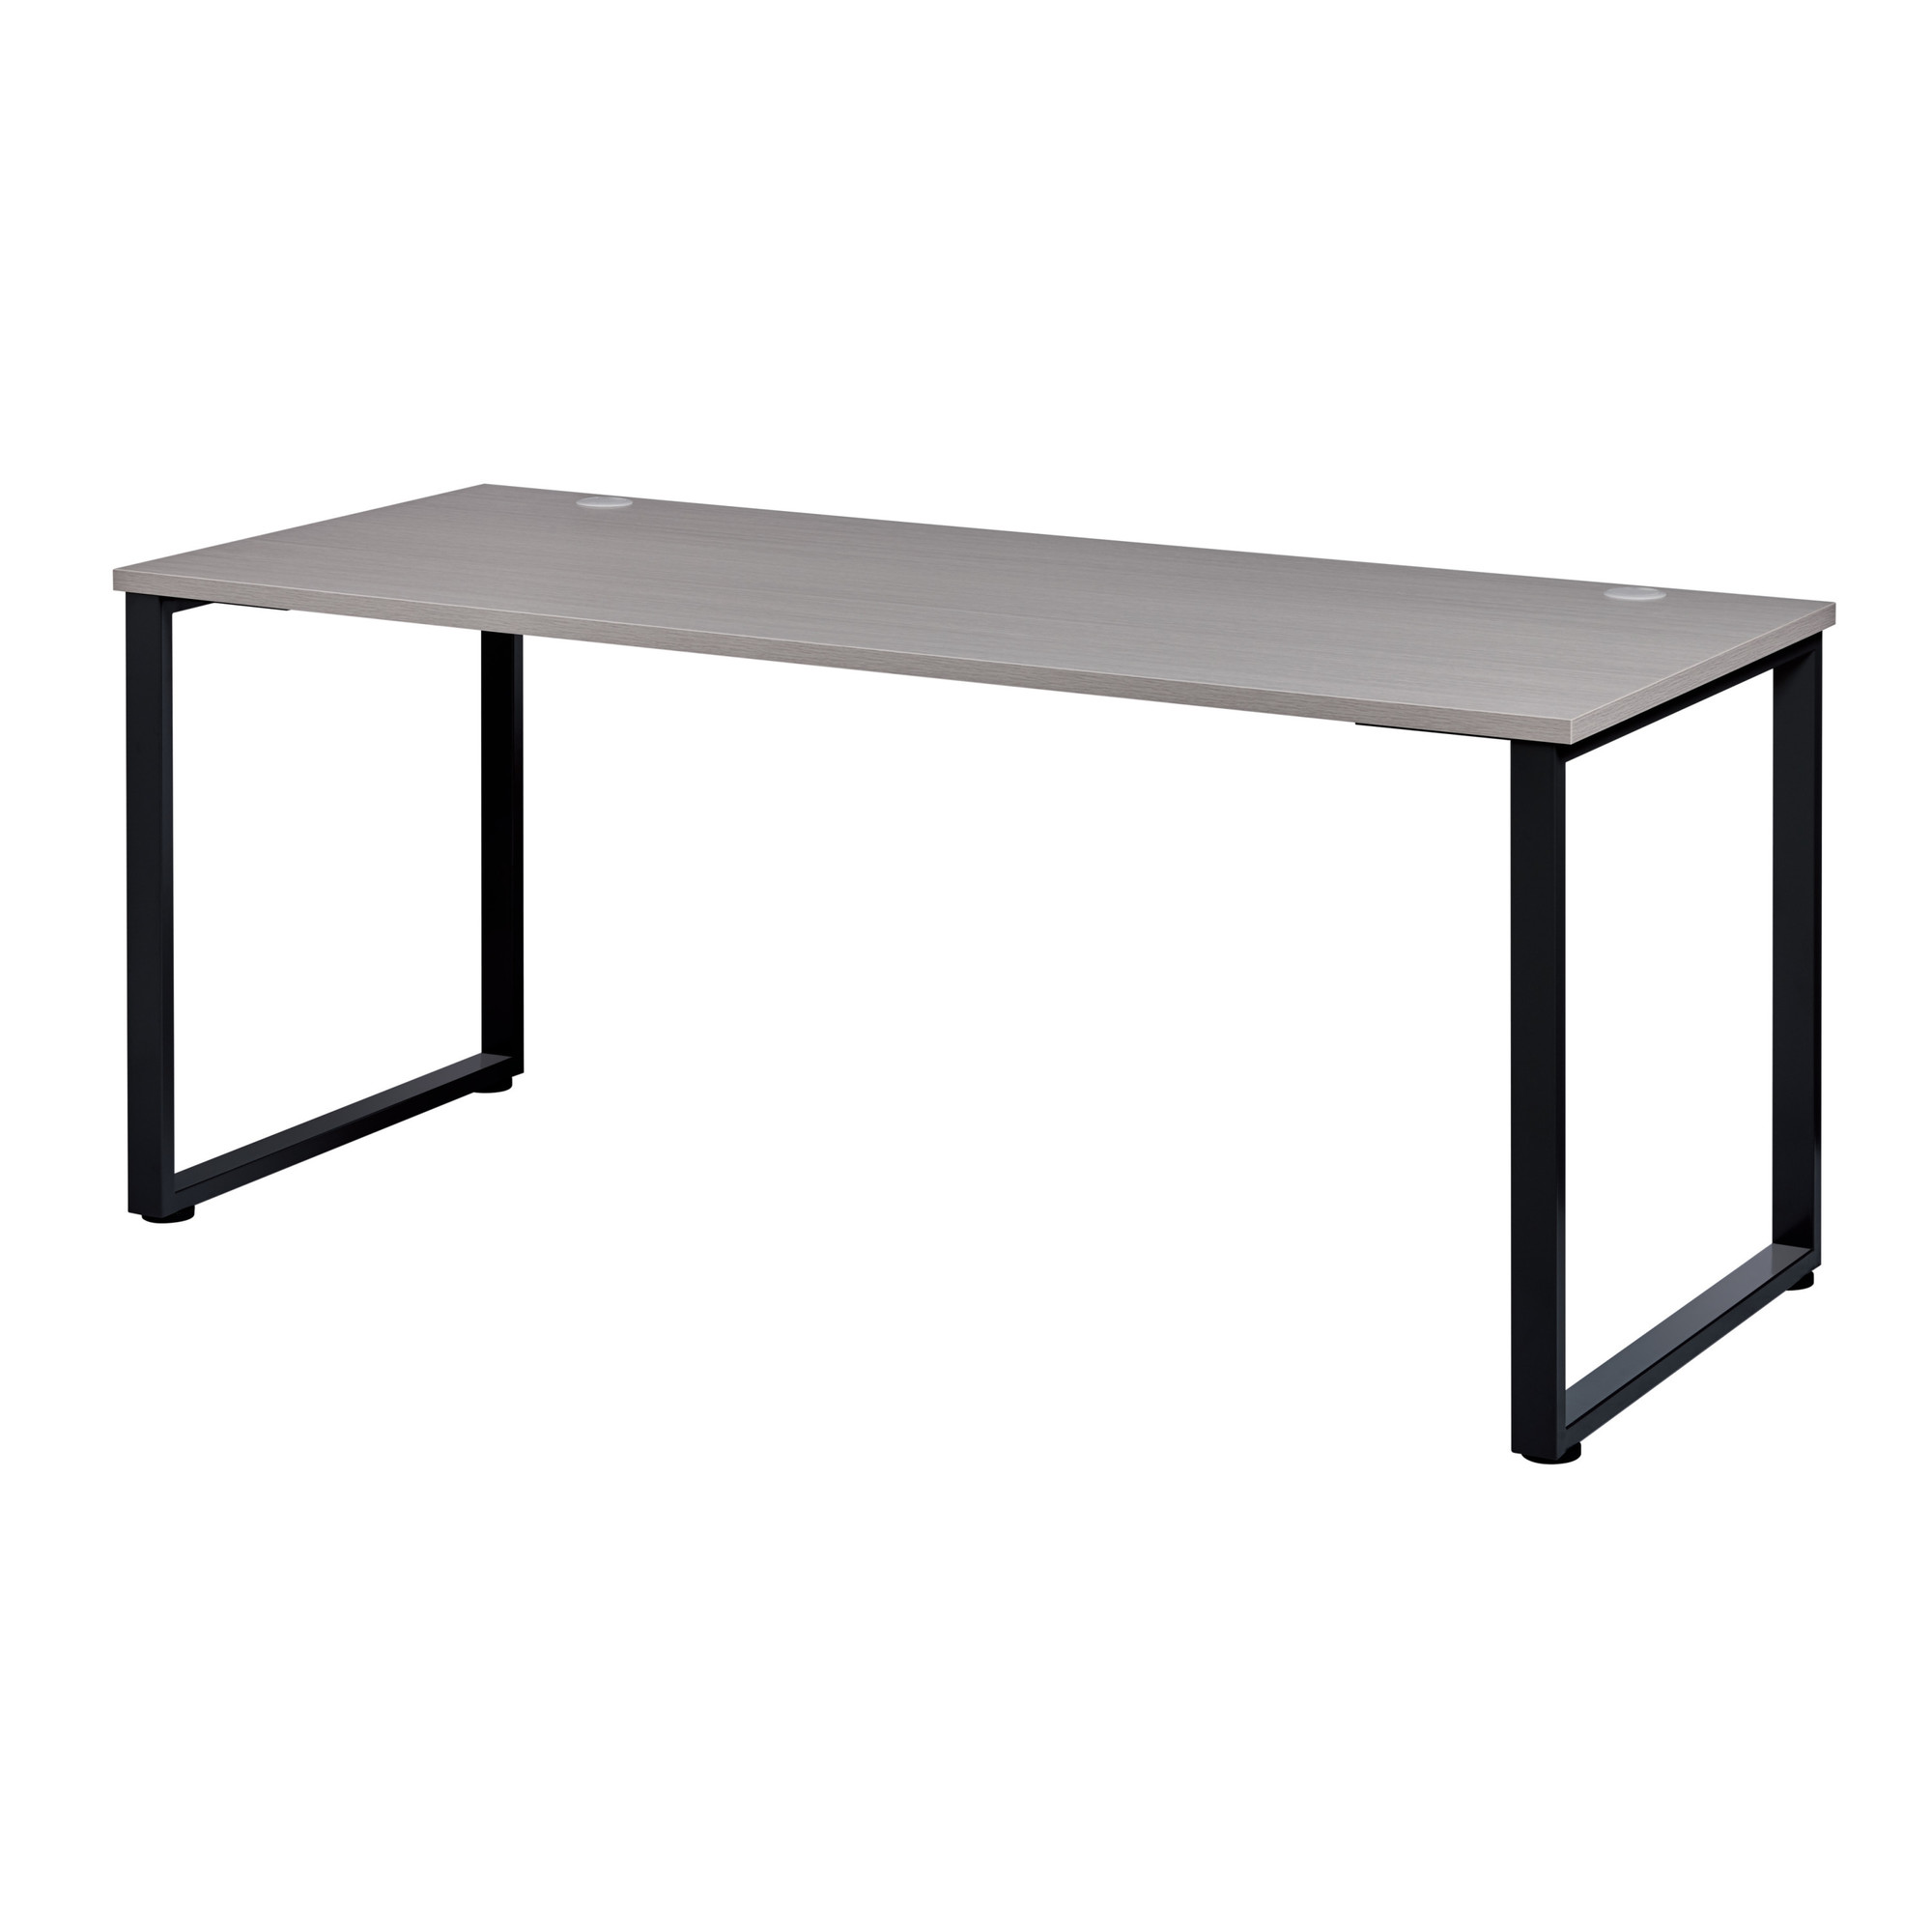 Hirsh Industries, Office Dimensions Open Desk with O-leg, Width 70.9 in, Height 29.9 in, Depth 29.5 in, Model 24783